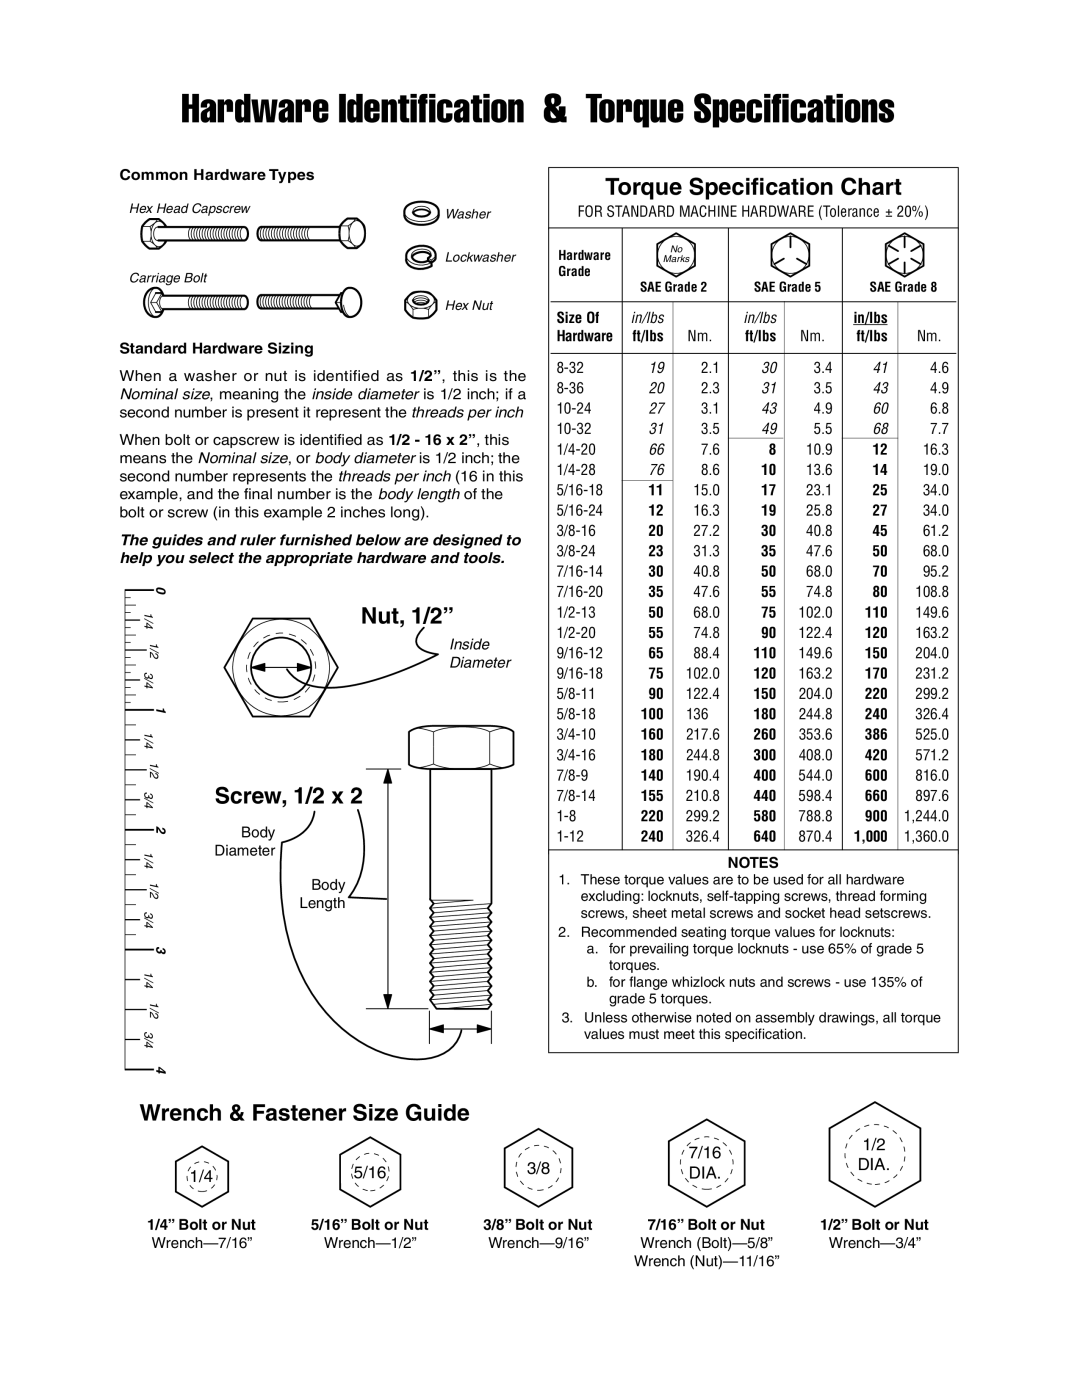 Snapper 4563 Wrench & Fastener Size Guide, Hardware Identification & Torque Specifications, Torque Specification Chart 